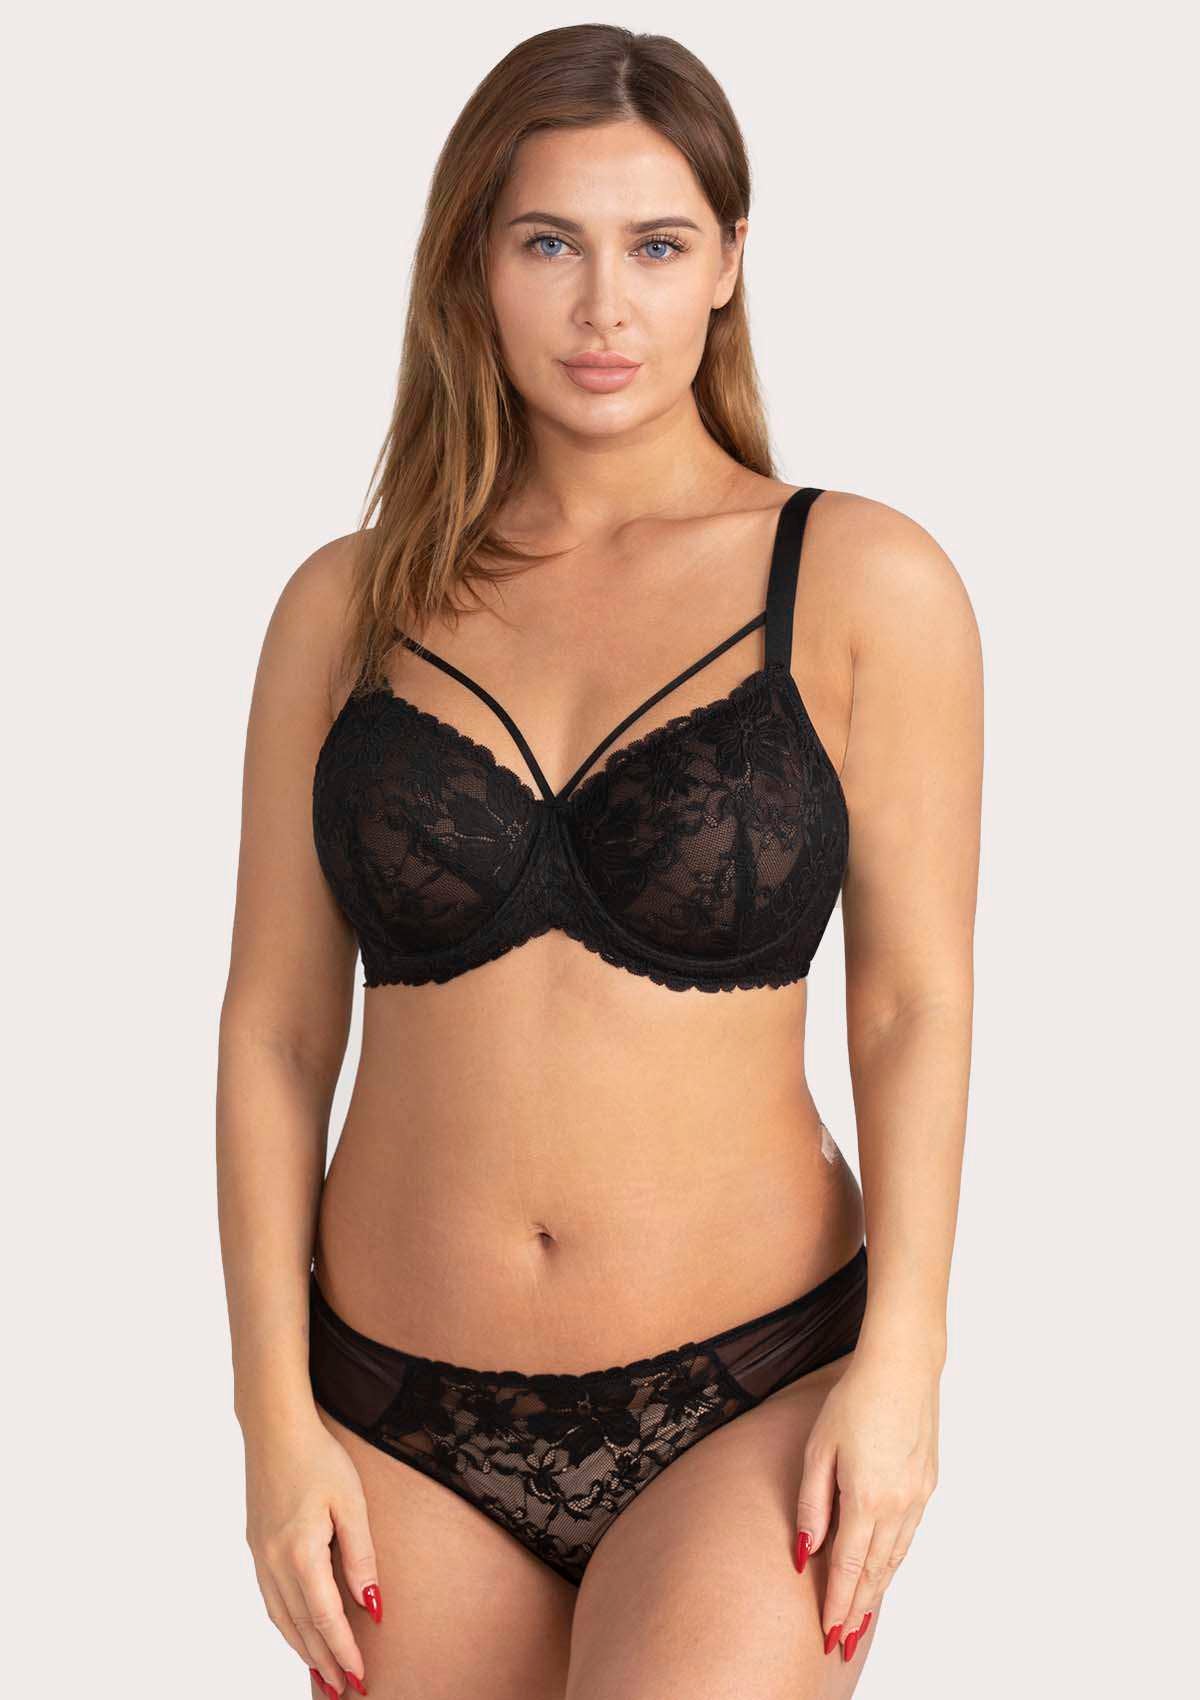 HSIA Pretty In Petals Lace Bra And Panty Set: Non Padded Wired Bra - Black / 34 / C